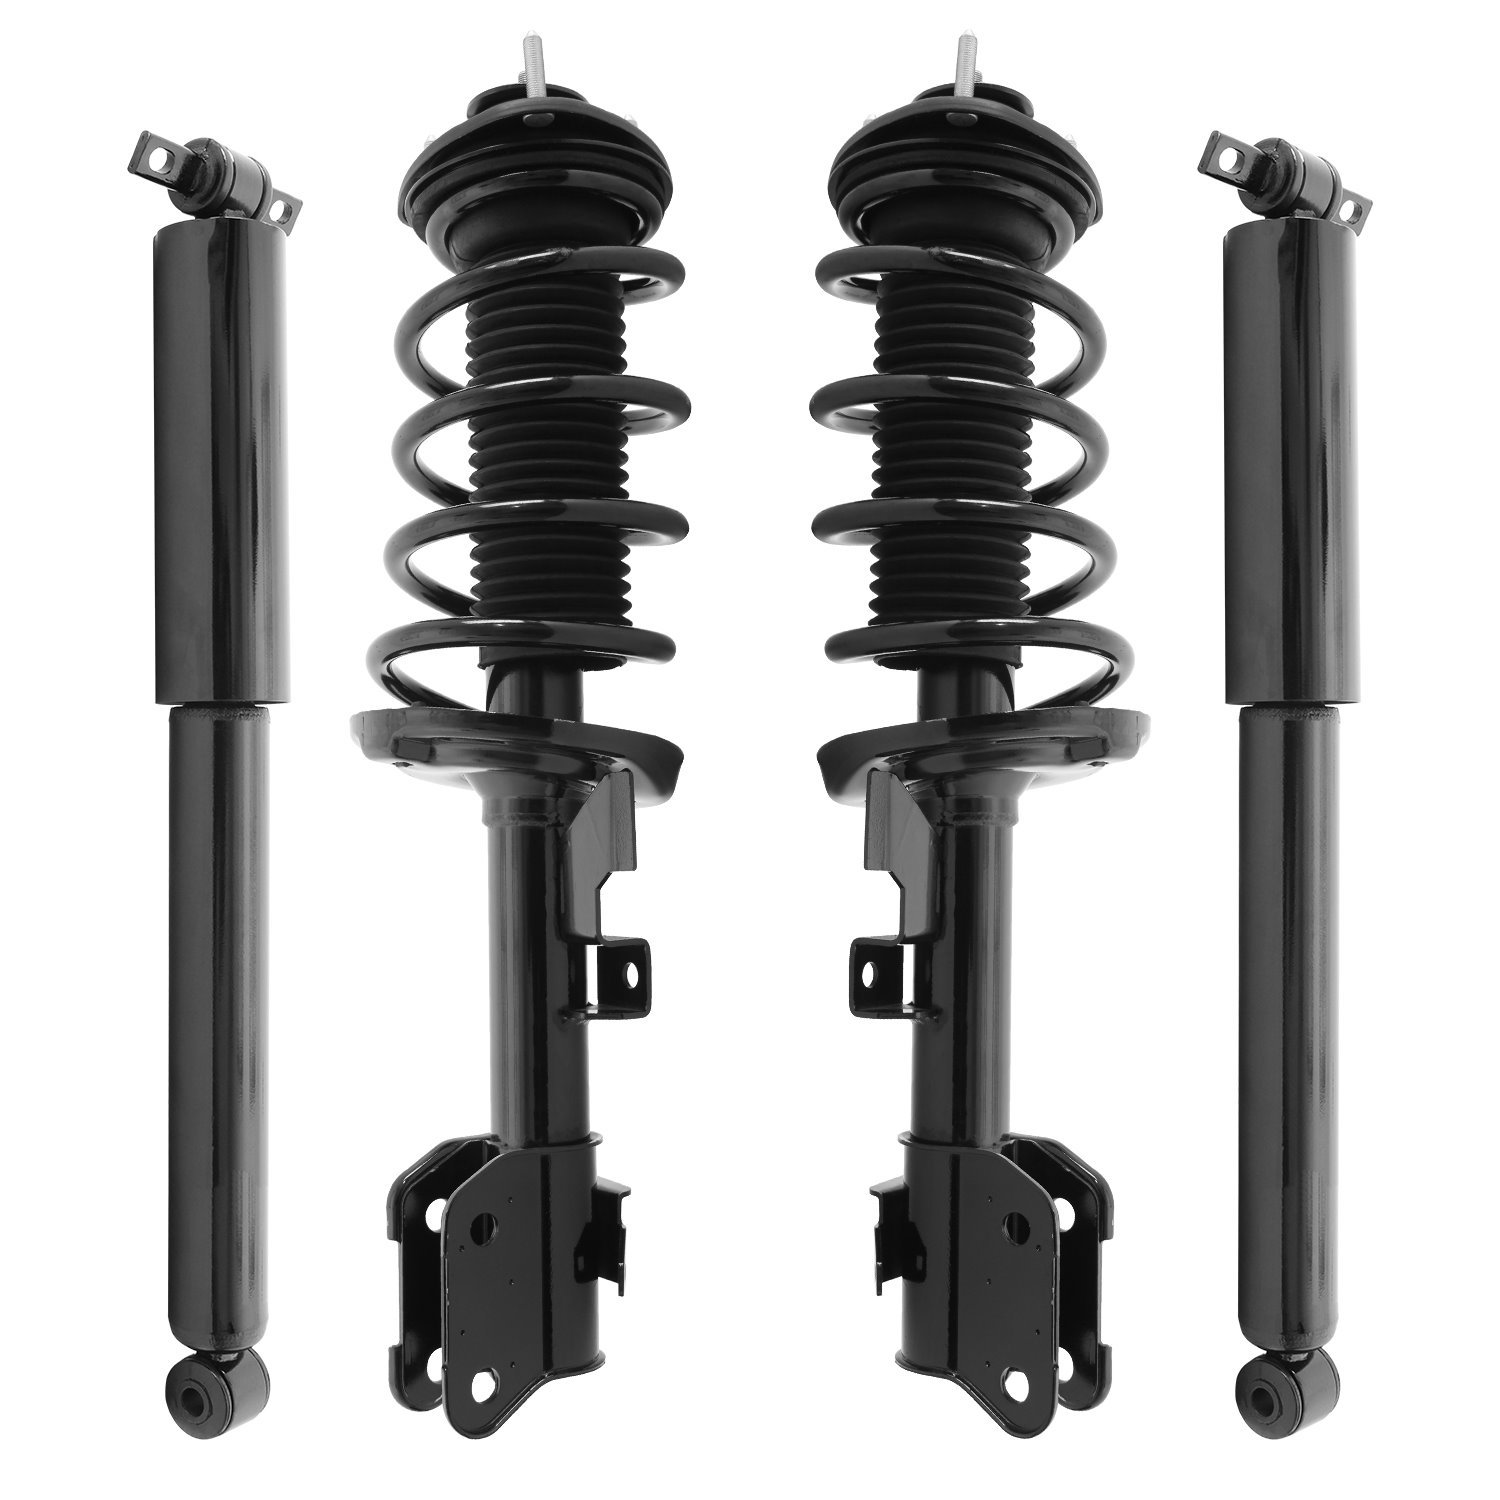 4-11907-250050-001 Front & Rear Suspension Strut & Coil Spring Assembly Fits Select Honda Odyssey